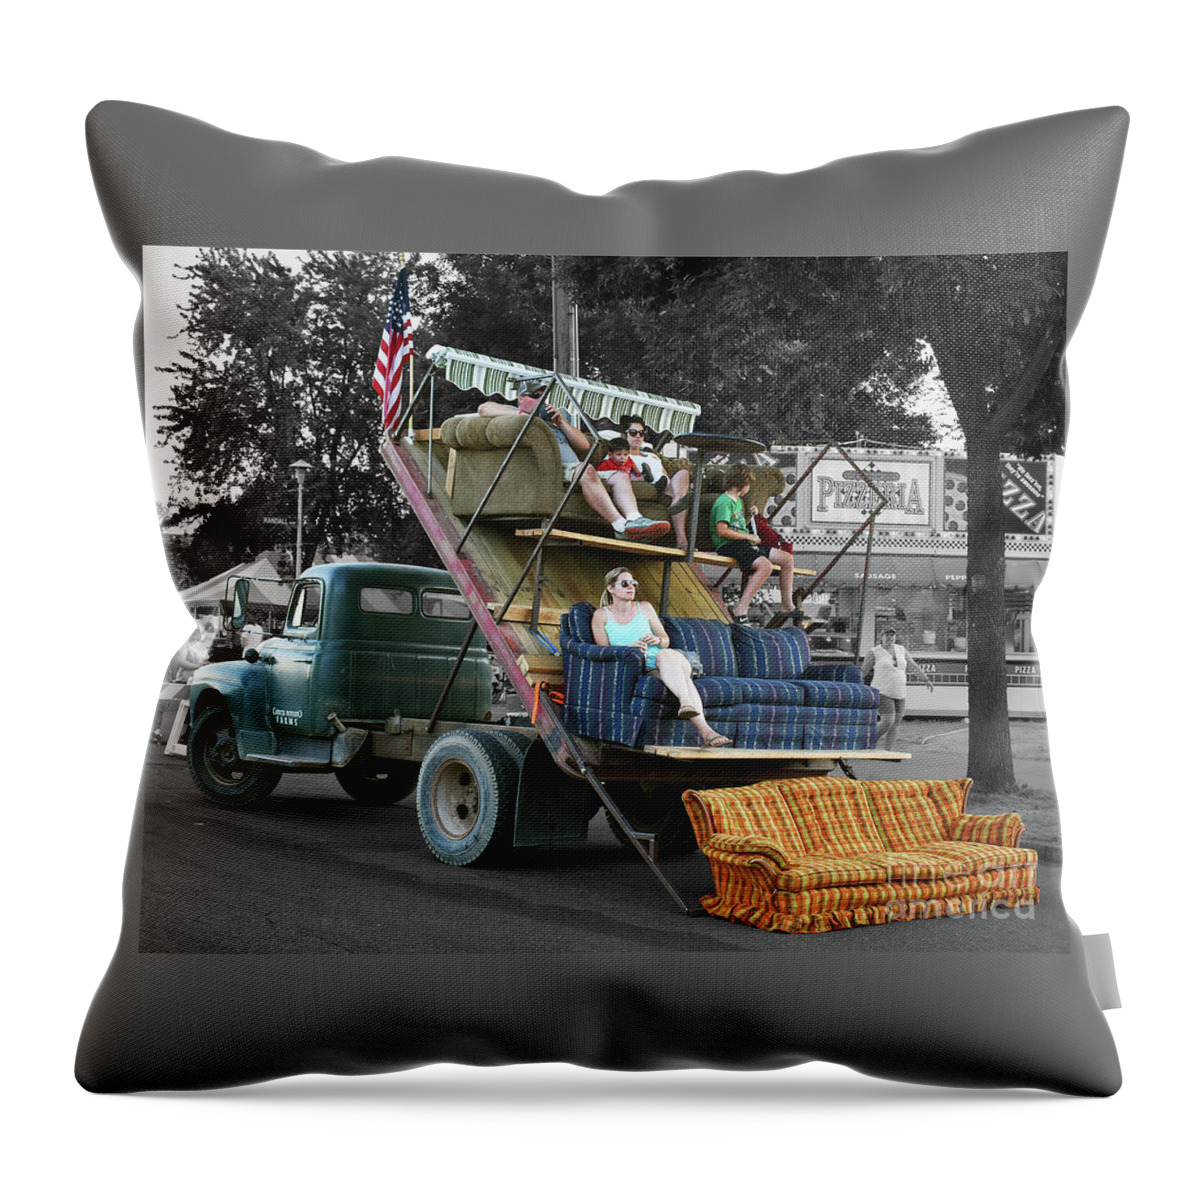 Couch Potato Throw Pillow featuring the photograph Couch Potato Transformer by Ron Long